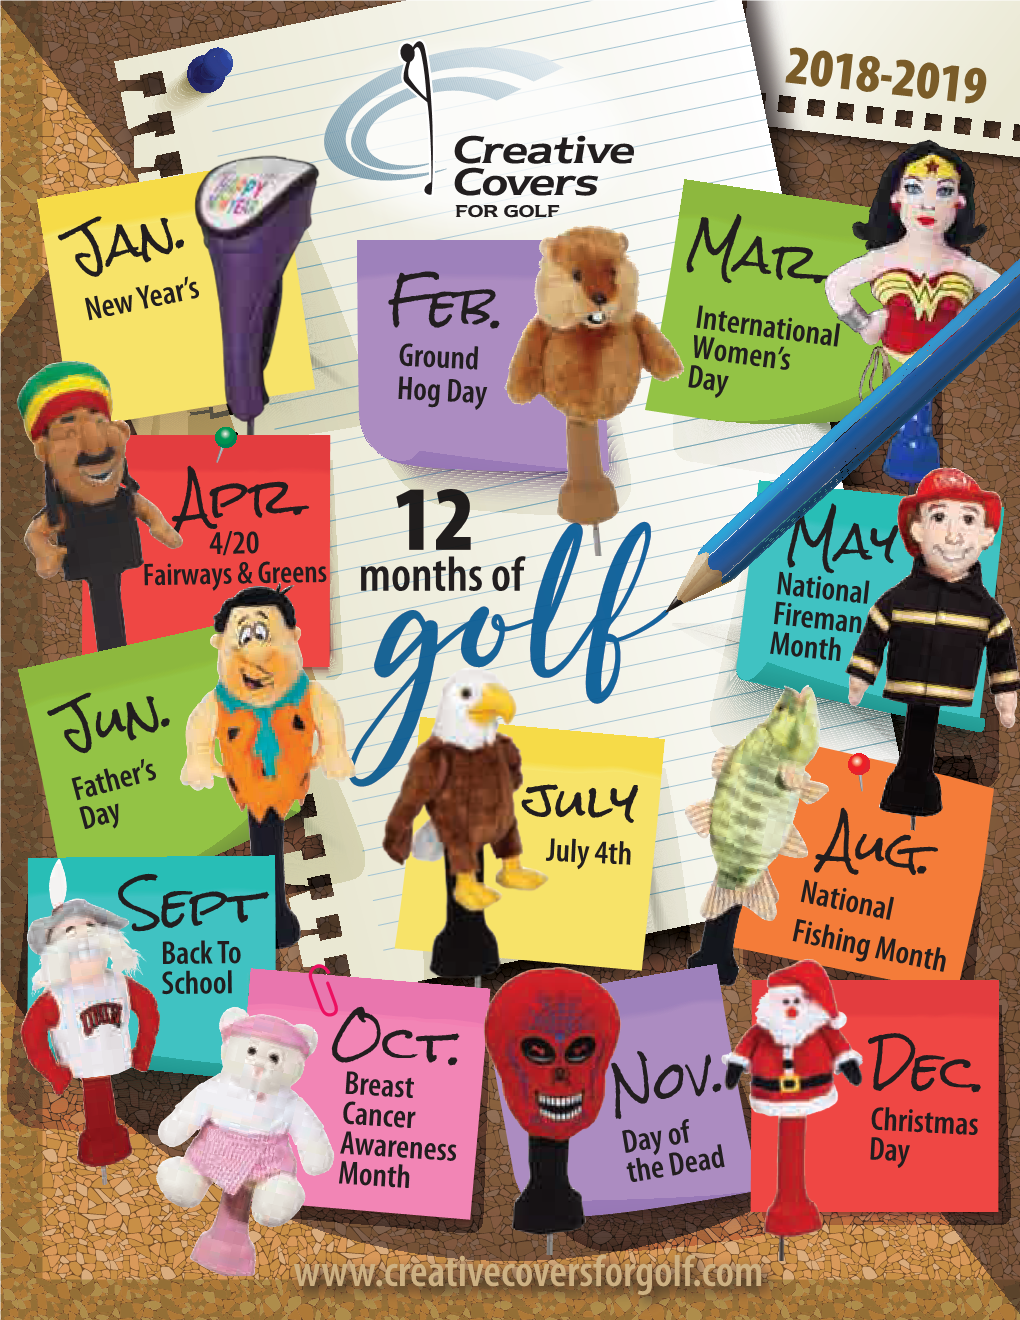 Creative Covers for Golf 2018-2019